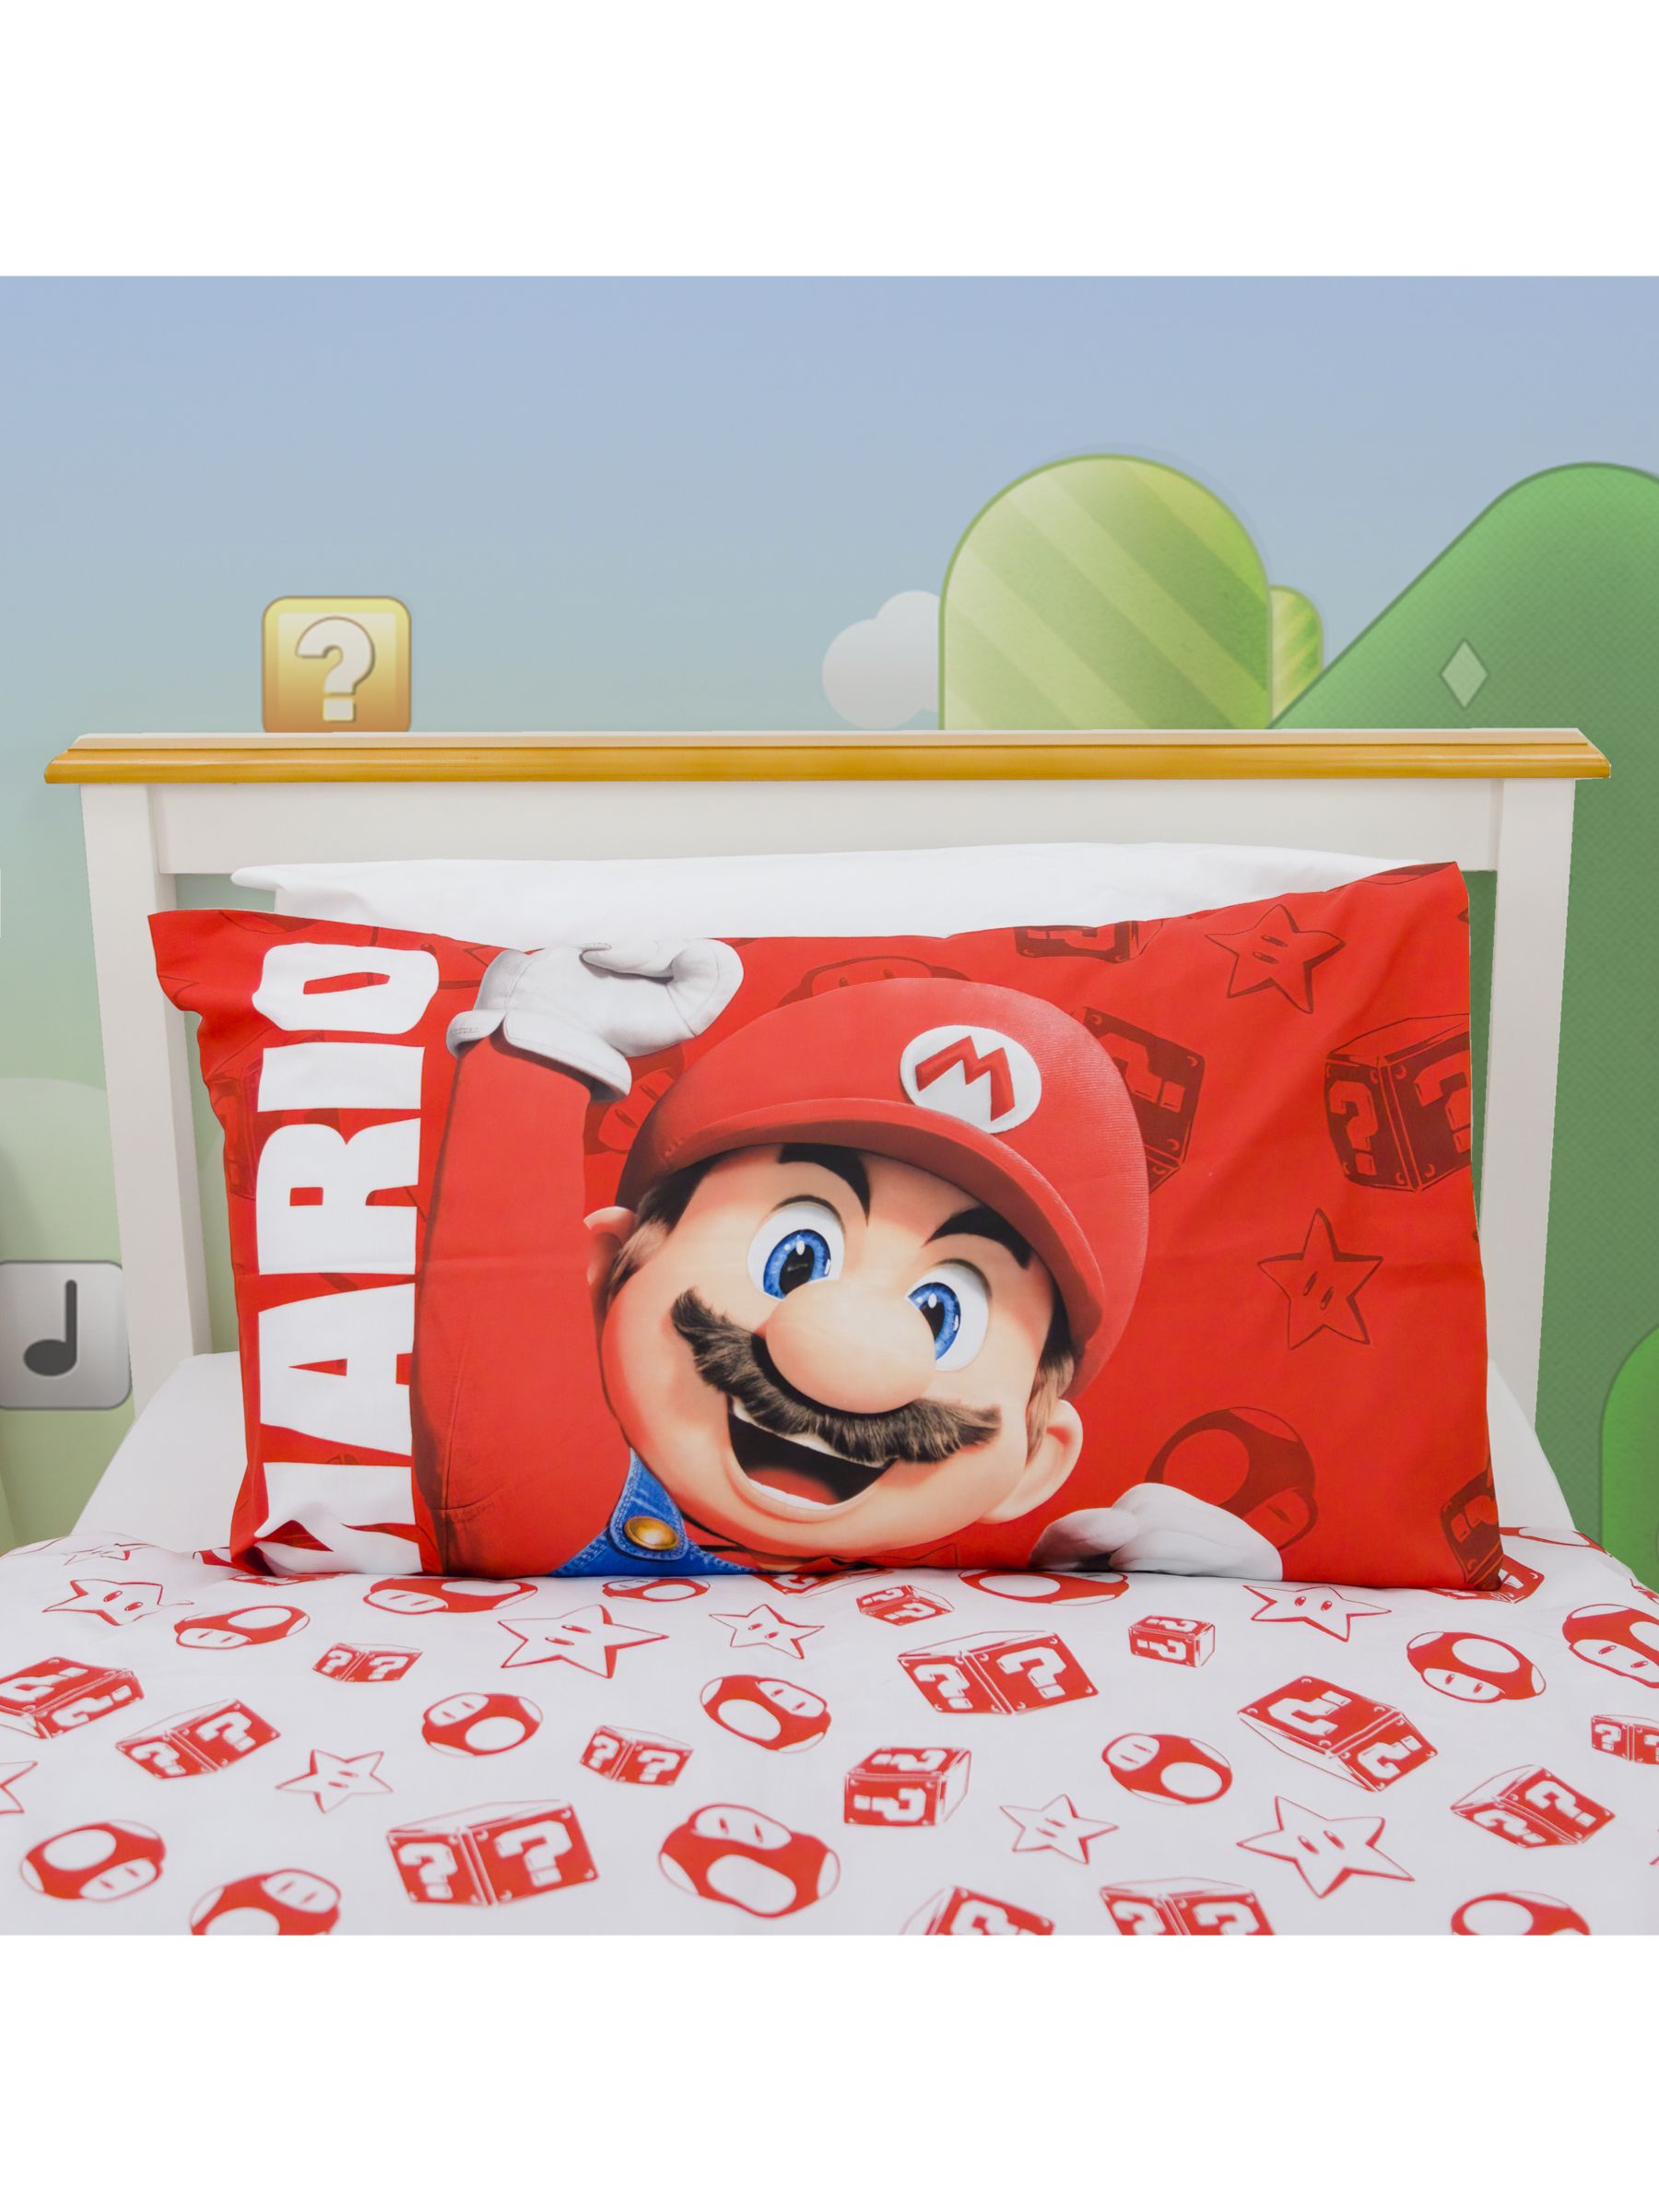 Super Mario Christmas Tree Ornament Gift For Kids - Trends Bedding